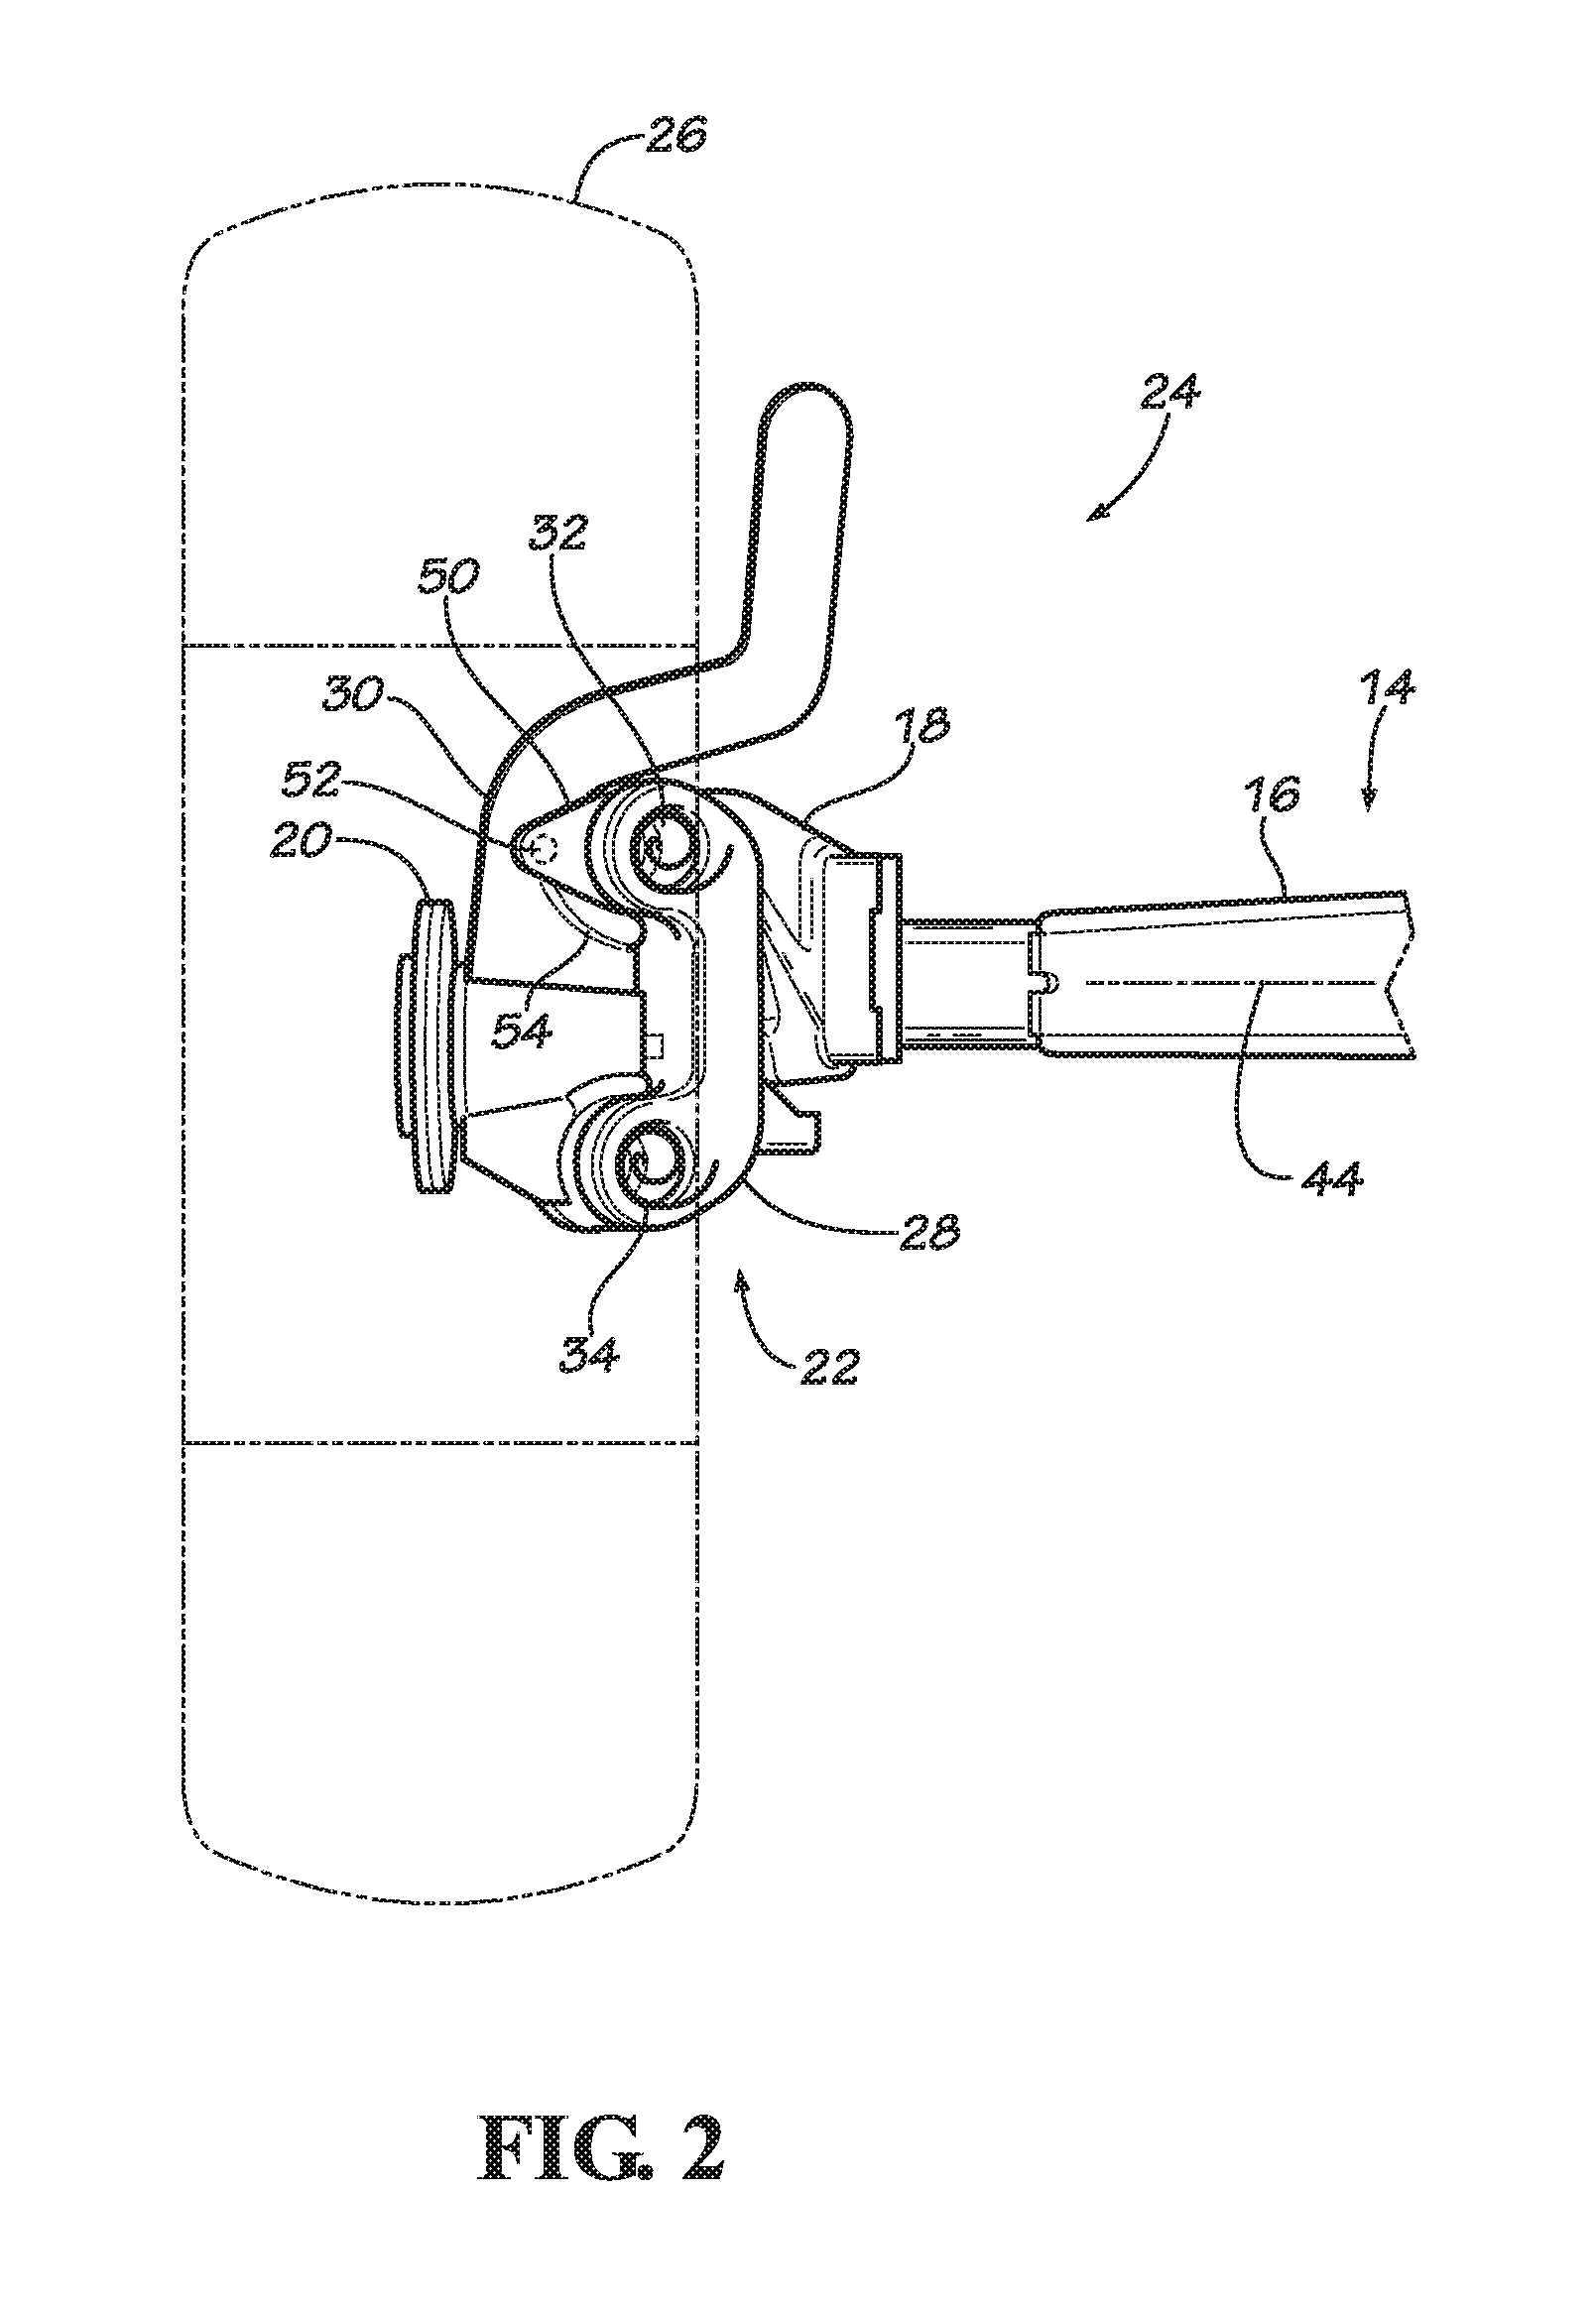 Axle Assembly for a Vehicle with a Double Kingpin Hinge Arrangement